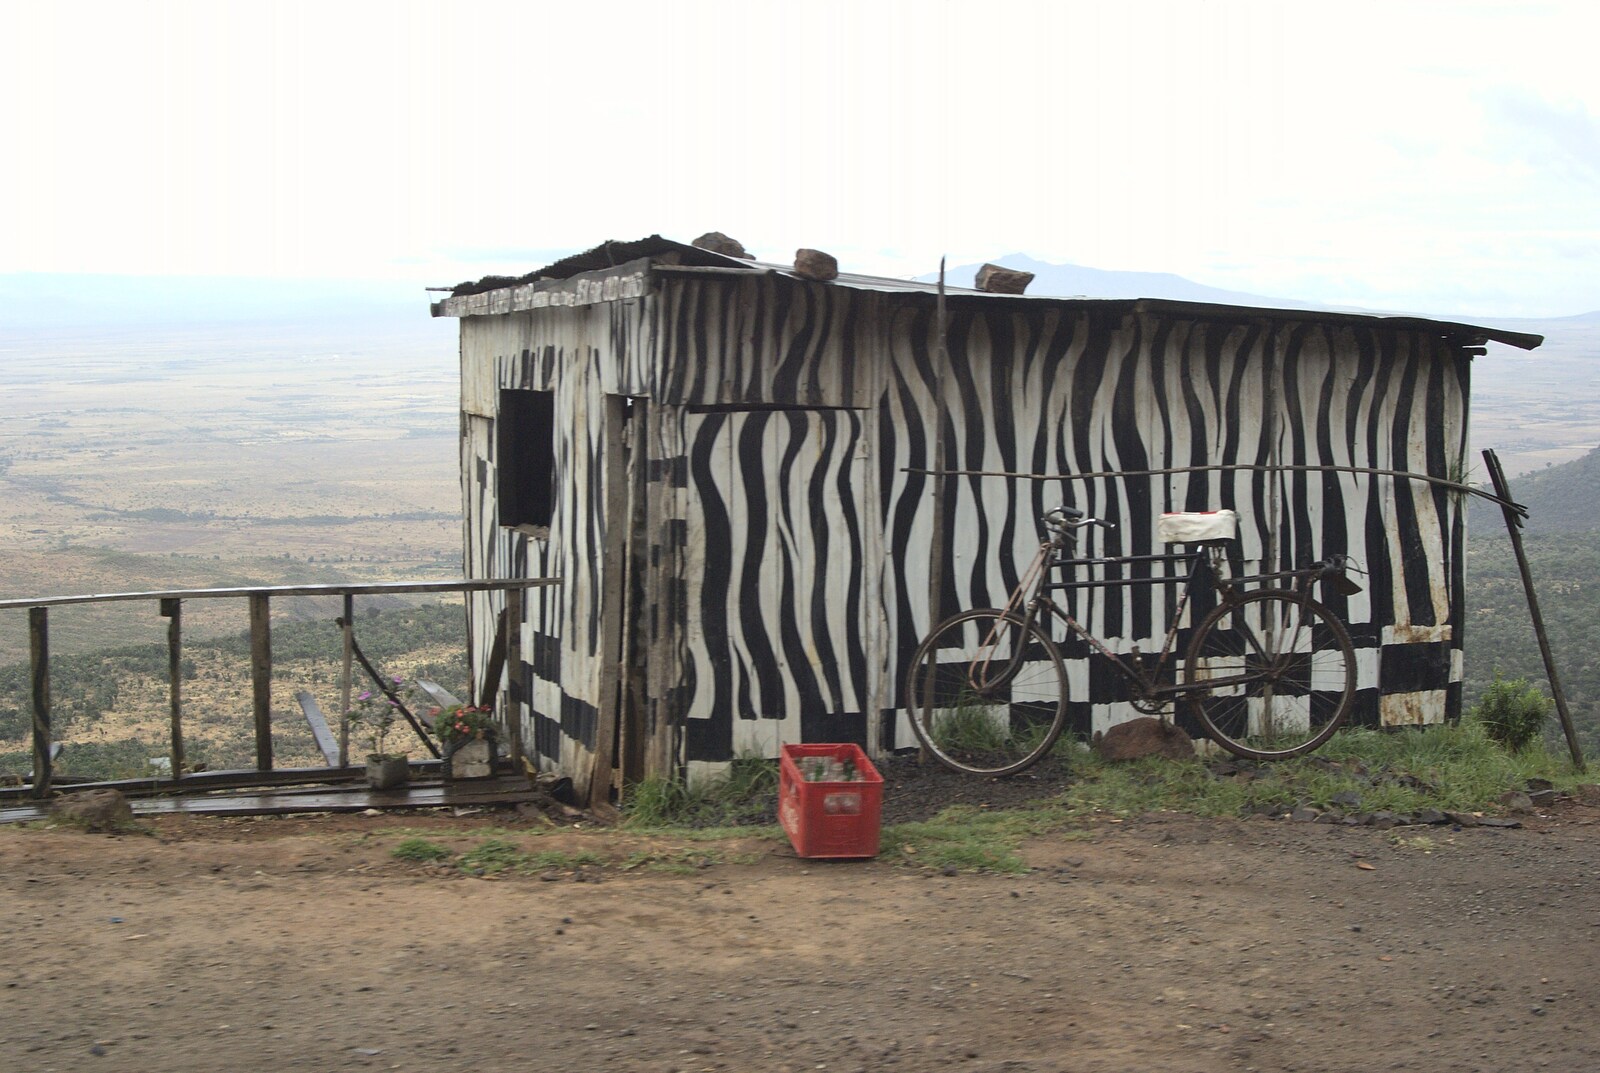 A zebra-striped hut looks out over the Rift Valley from Nairobi and the Road to Maasai Mara, Kenya, Africa - 1st November 2010